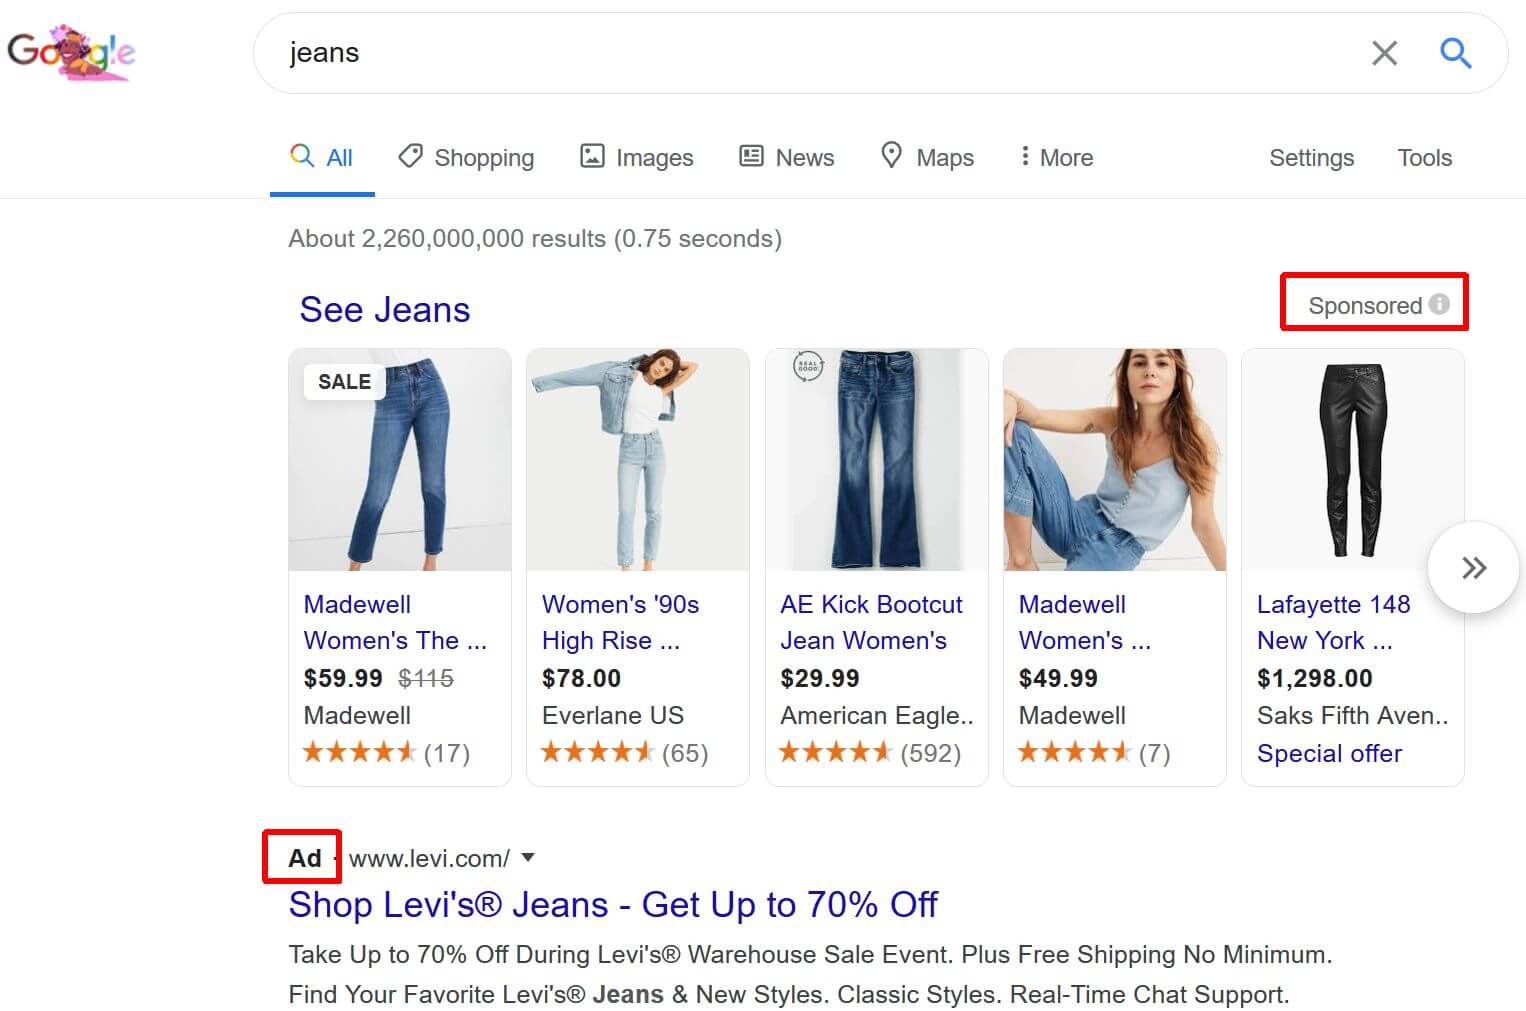 Google is streamlining 'Ad' labeling for Shopping ads